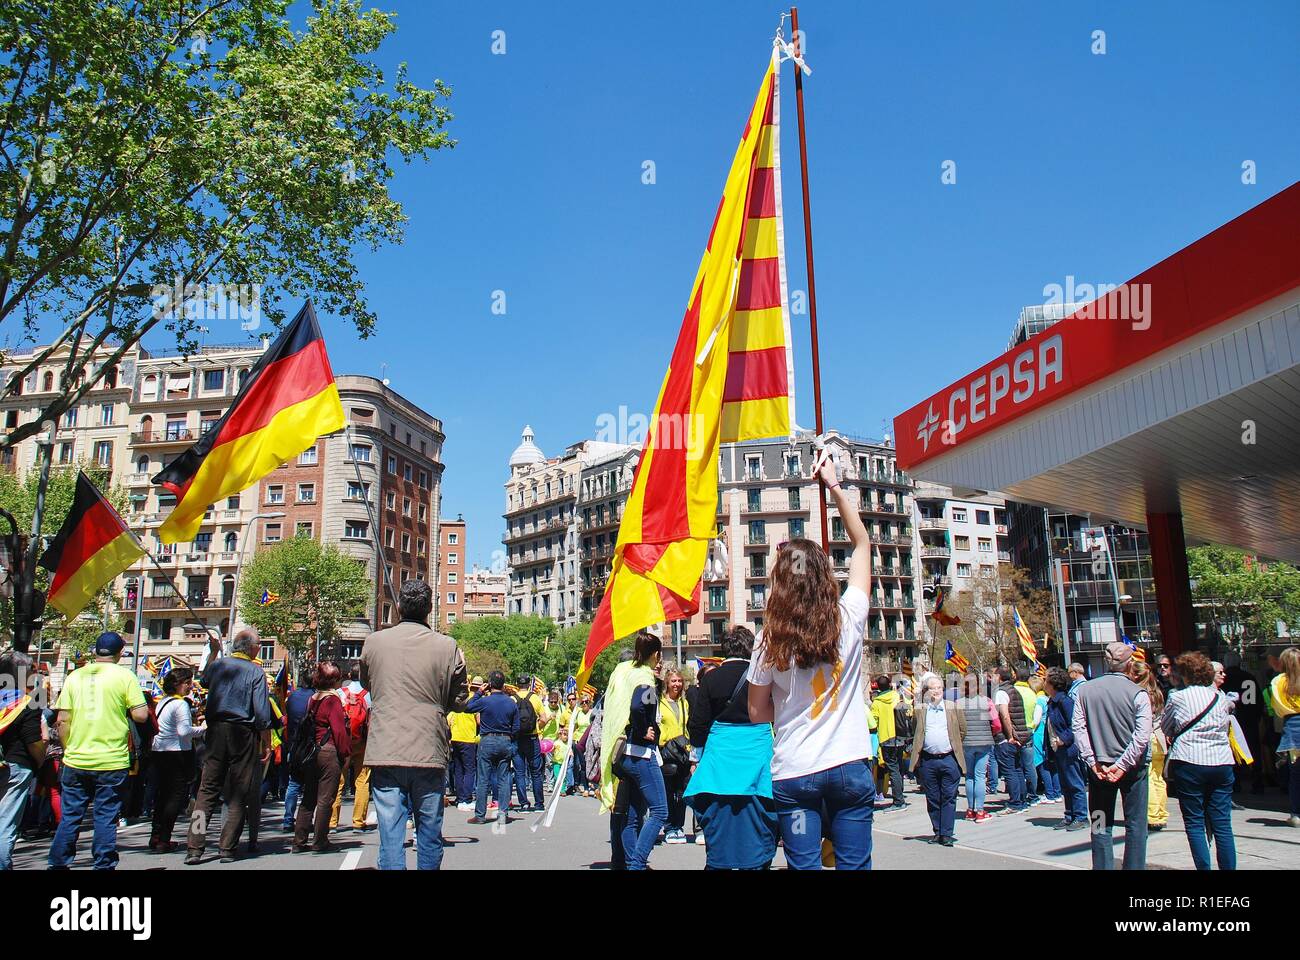 Catalans wave flags during a Llibertat Presos Politics (Free Political Prisoners) march in central Barcelona, Spain on April 15, 2018. Stock Photo